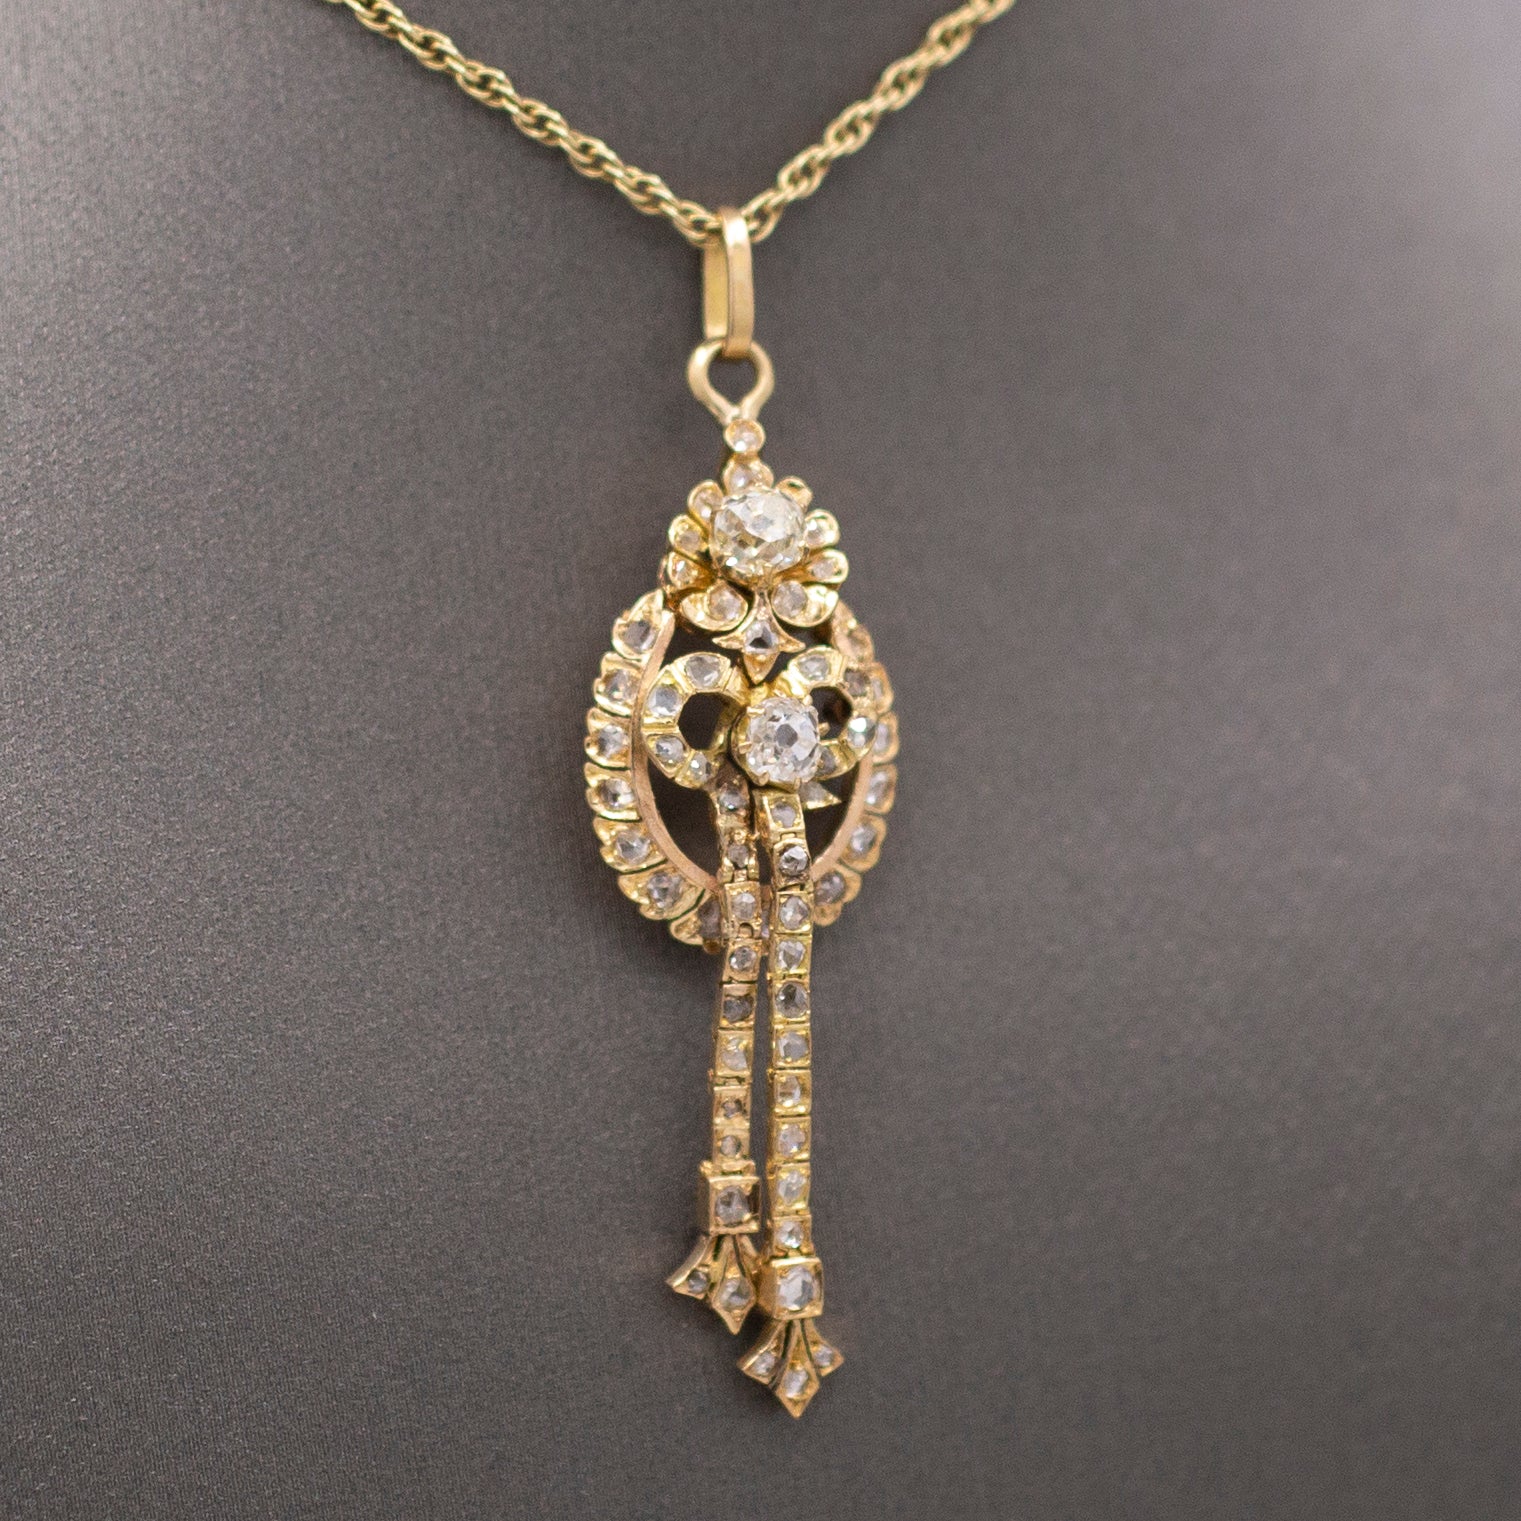 Victorian Old Mine Cut and Rose Cut Diamond Pendant Necklace in 14k Yellow Gold